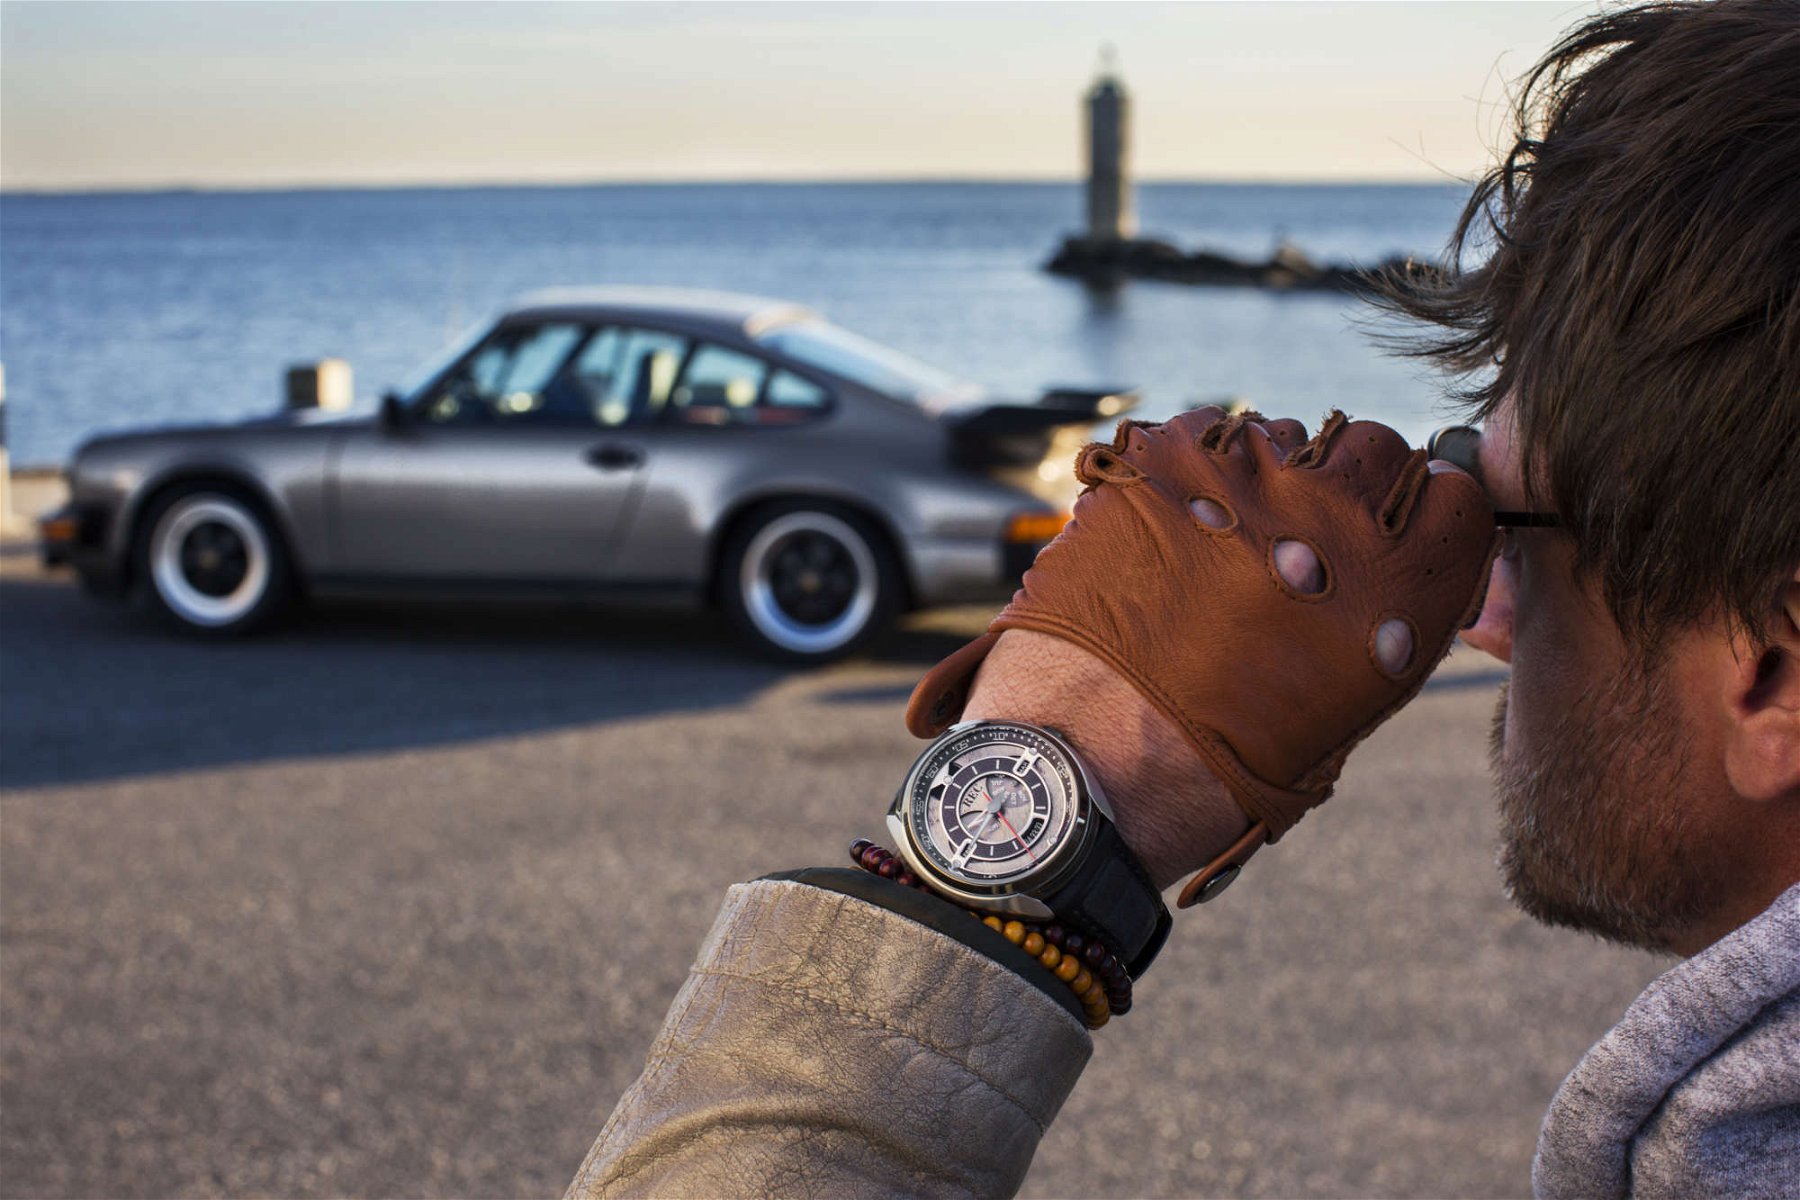 A 911 for the wrist